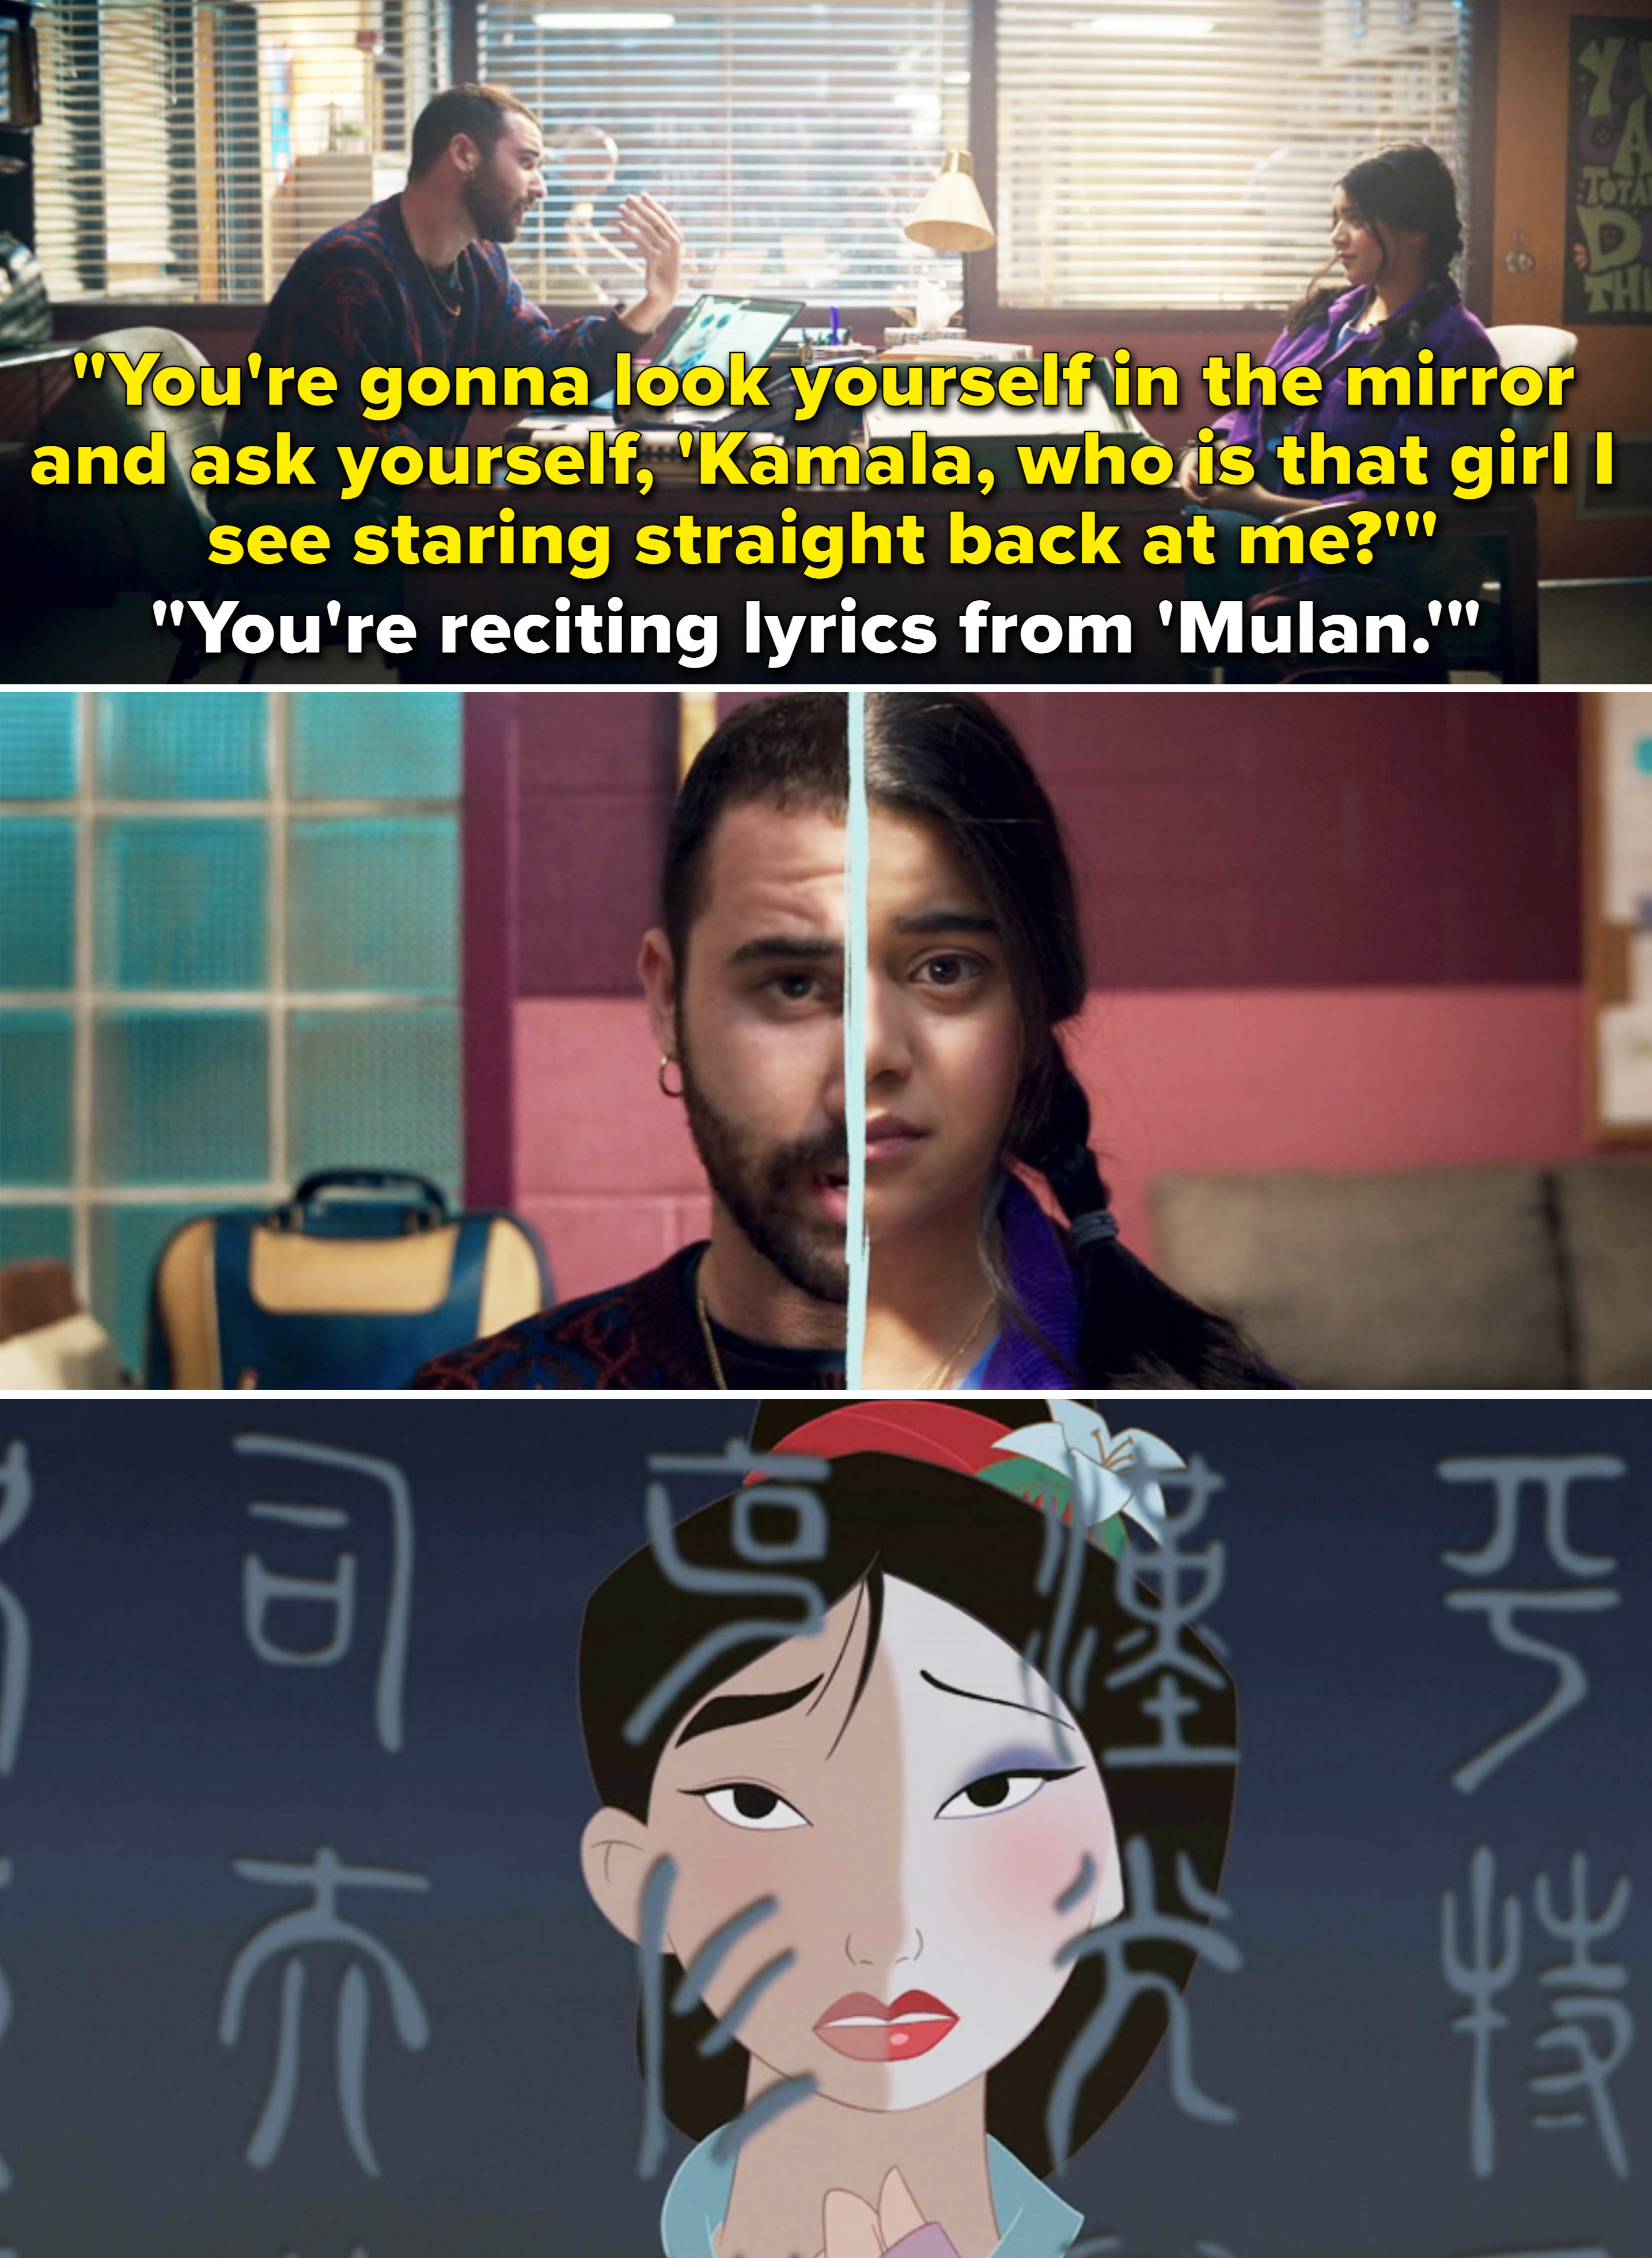 An image with a split screen of half of Kamala and Mr. Wilson&#x27;s faces, juxtaposed with half of Mulan&#x27;s face covered in makeup and the other half bare